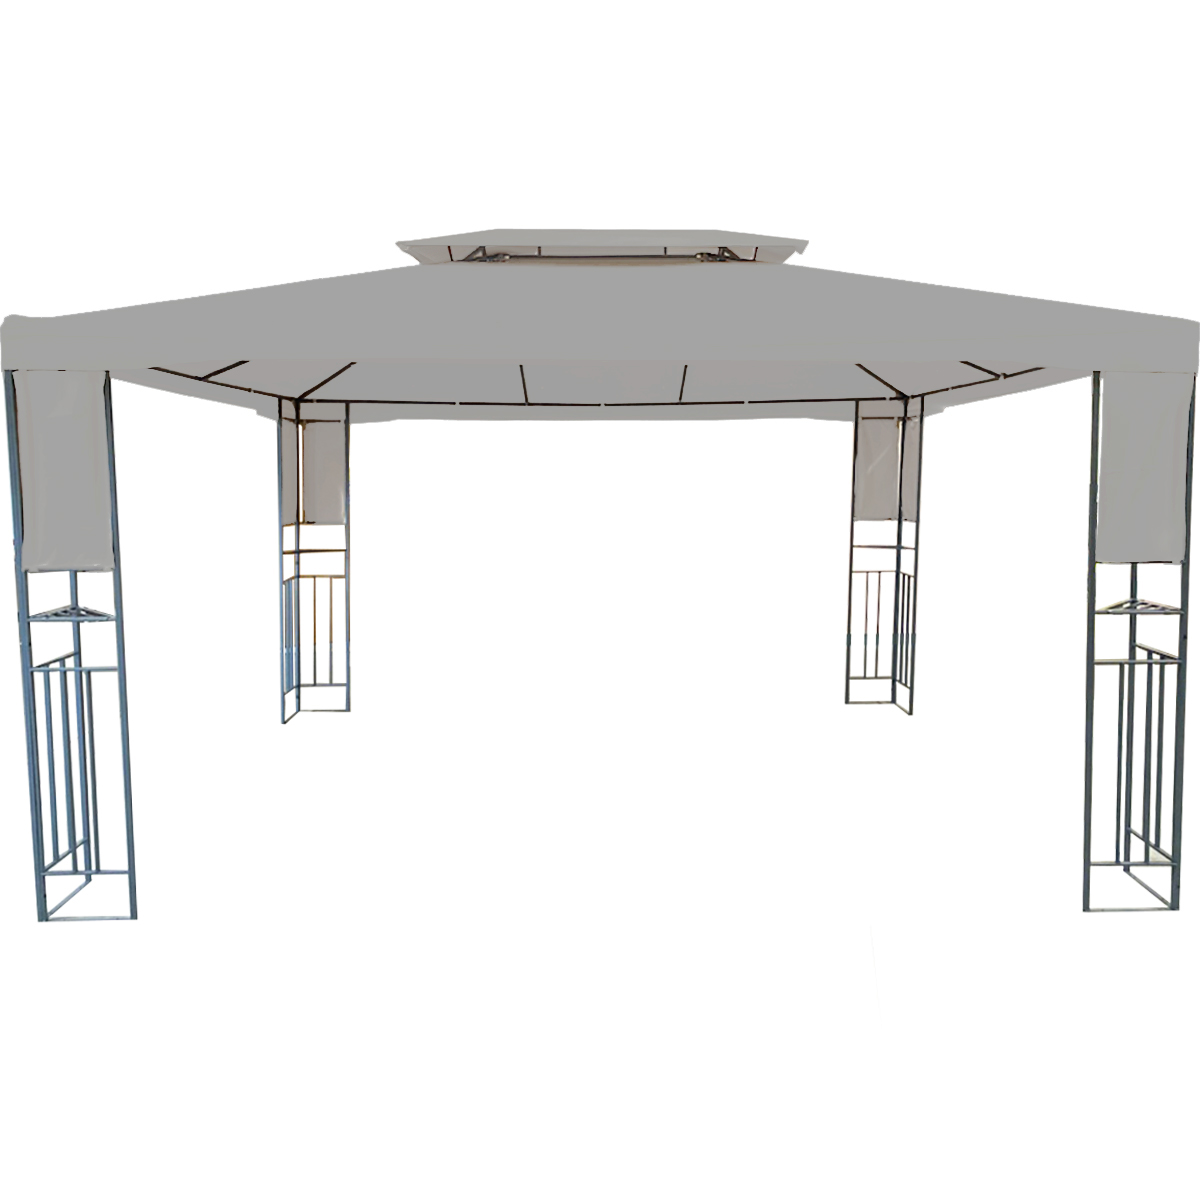 Replacement Canopy for 84C-323 10' x 13' Gazebo - Riplock 350